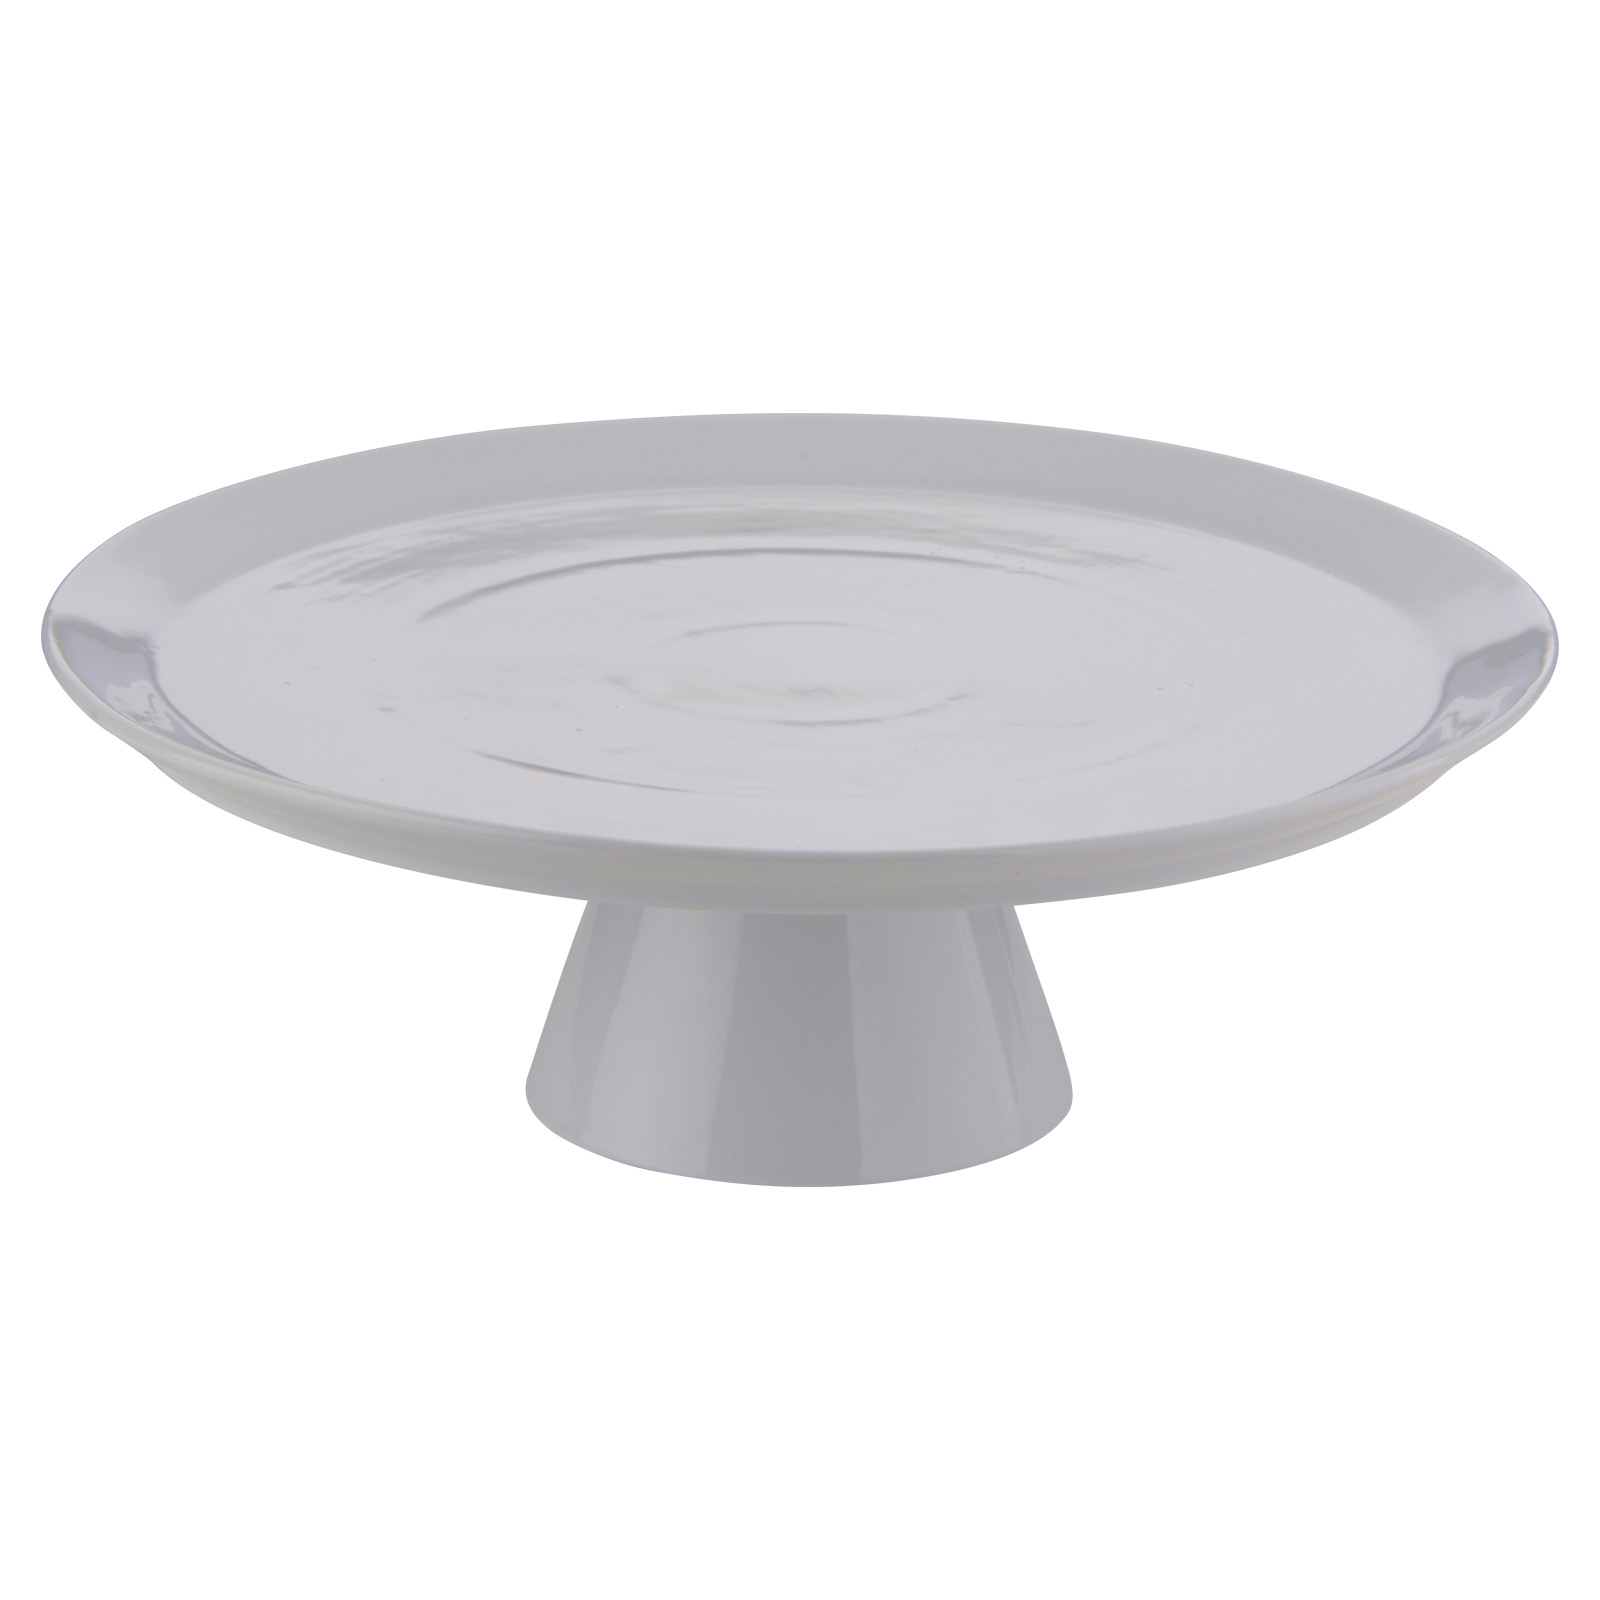 Cake Stand with Dome - Base Only